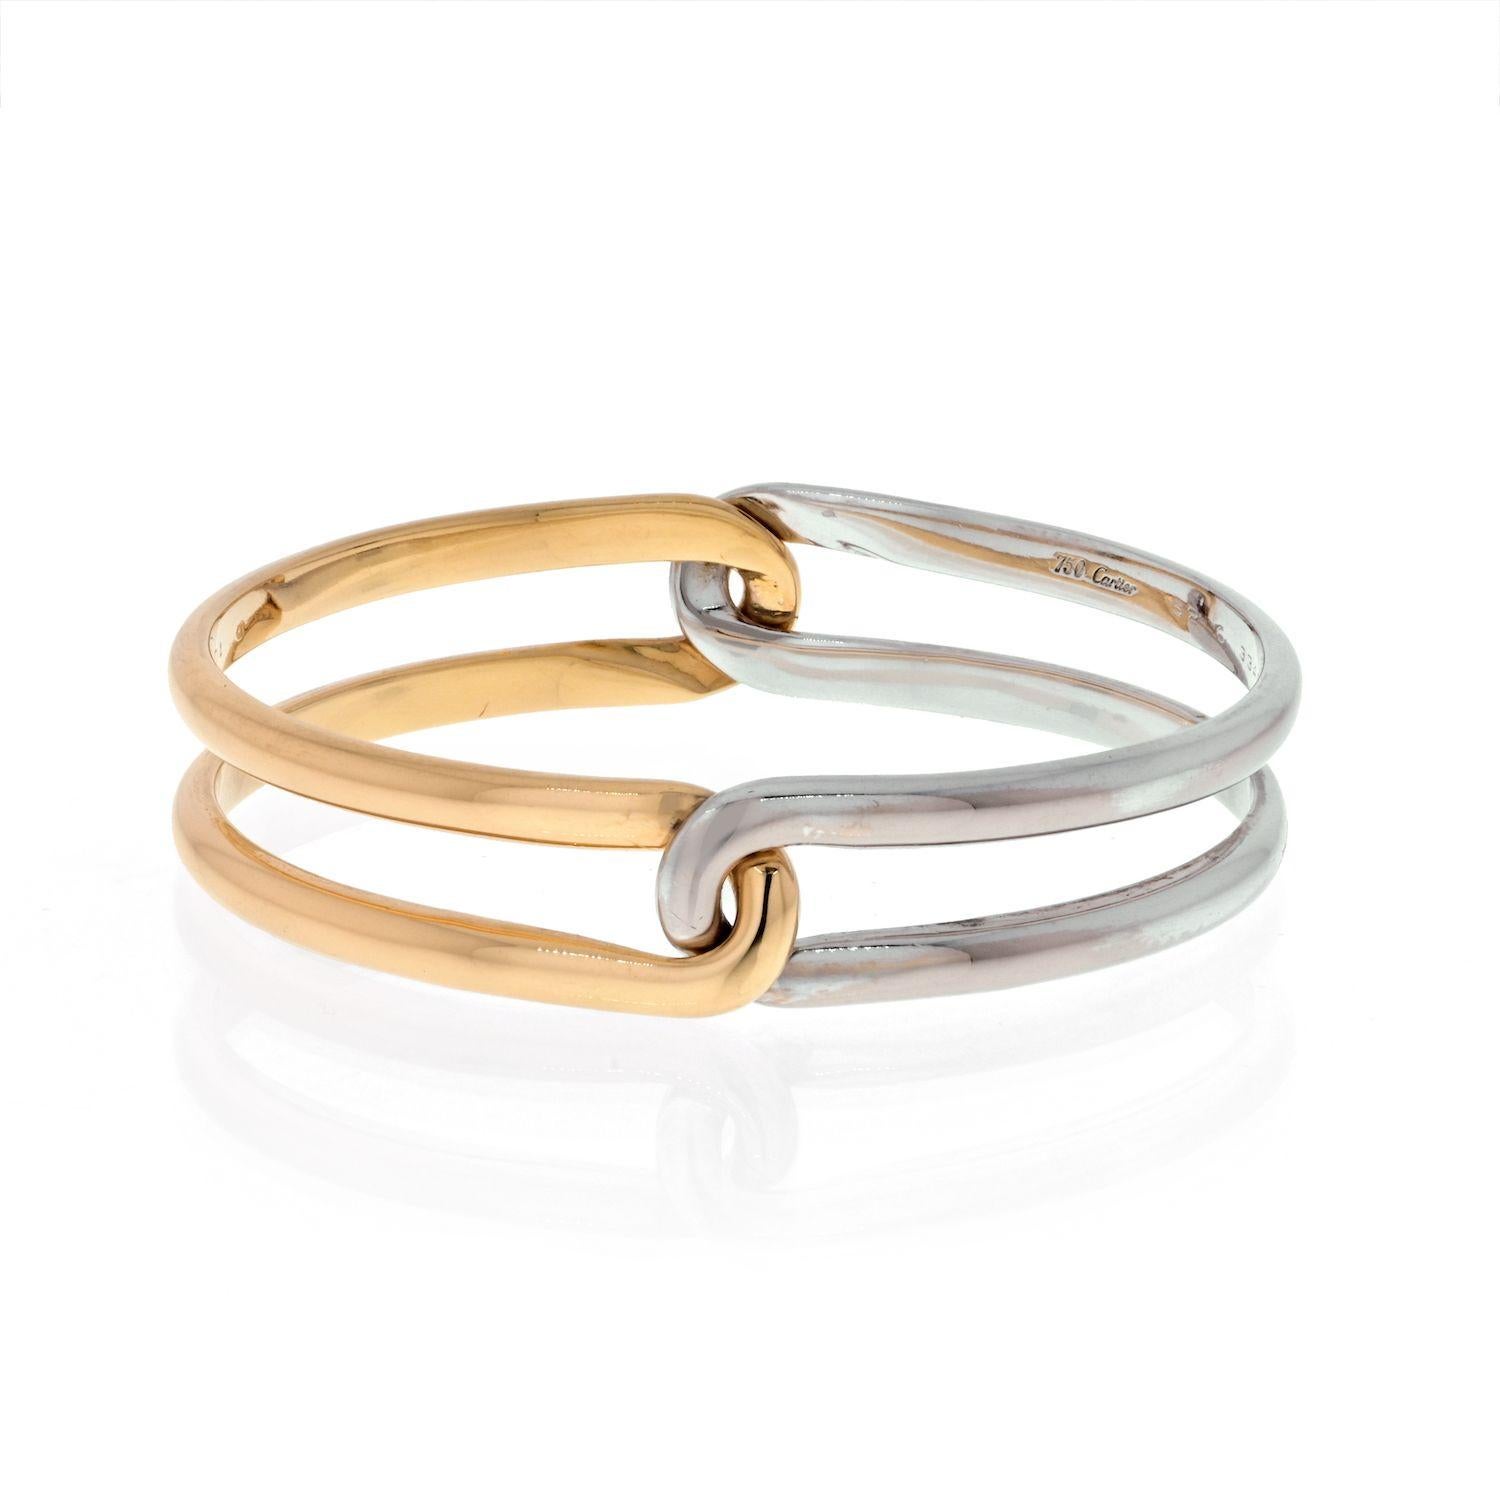 Crafted in 1994 this bracelet is by the famous house of Cartier.
Made in two tone 18k gold, this slip on bracelet is a perfect fit for wrist size 17.
The mechanism of the bangle is easy to assemple and disassemble creating a fun piece of jewelry for